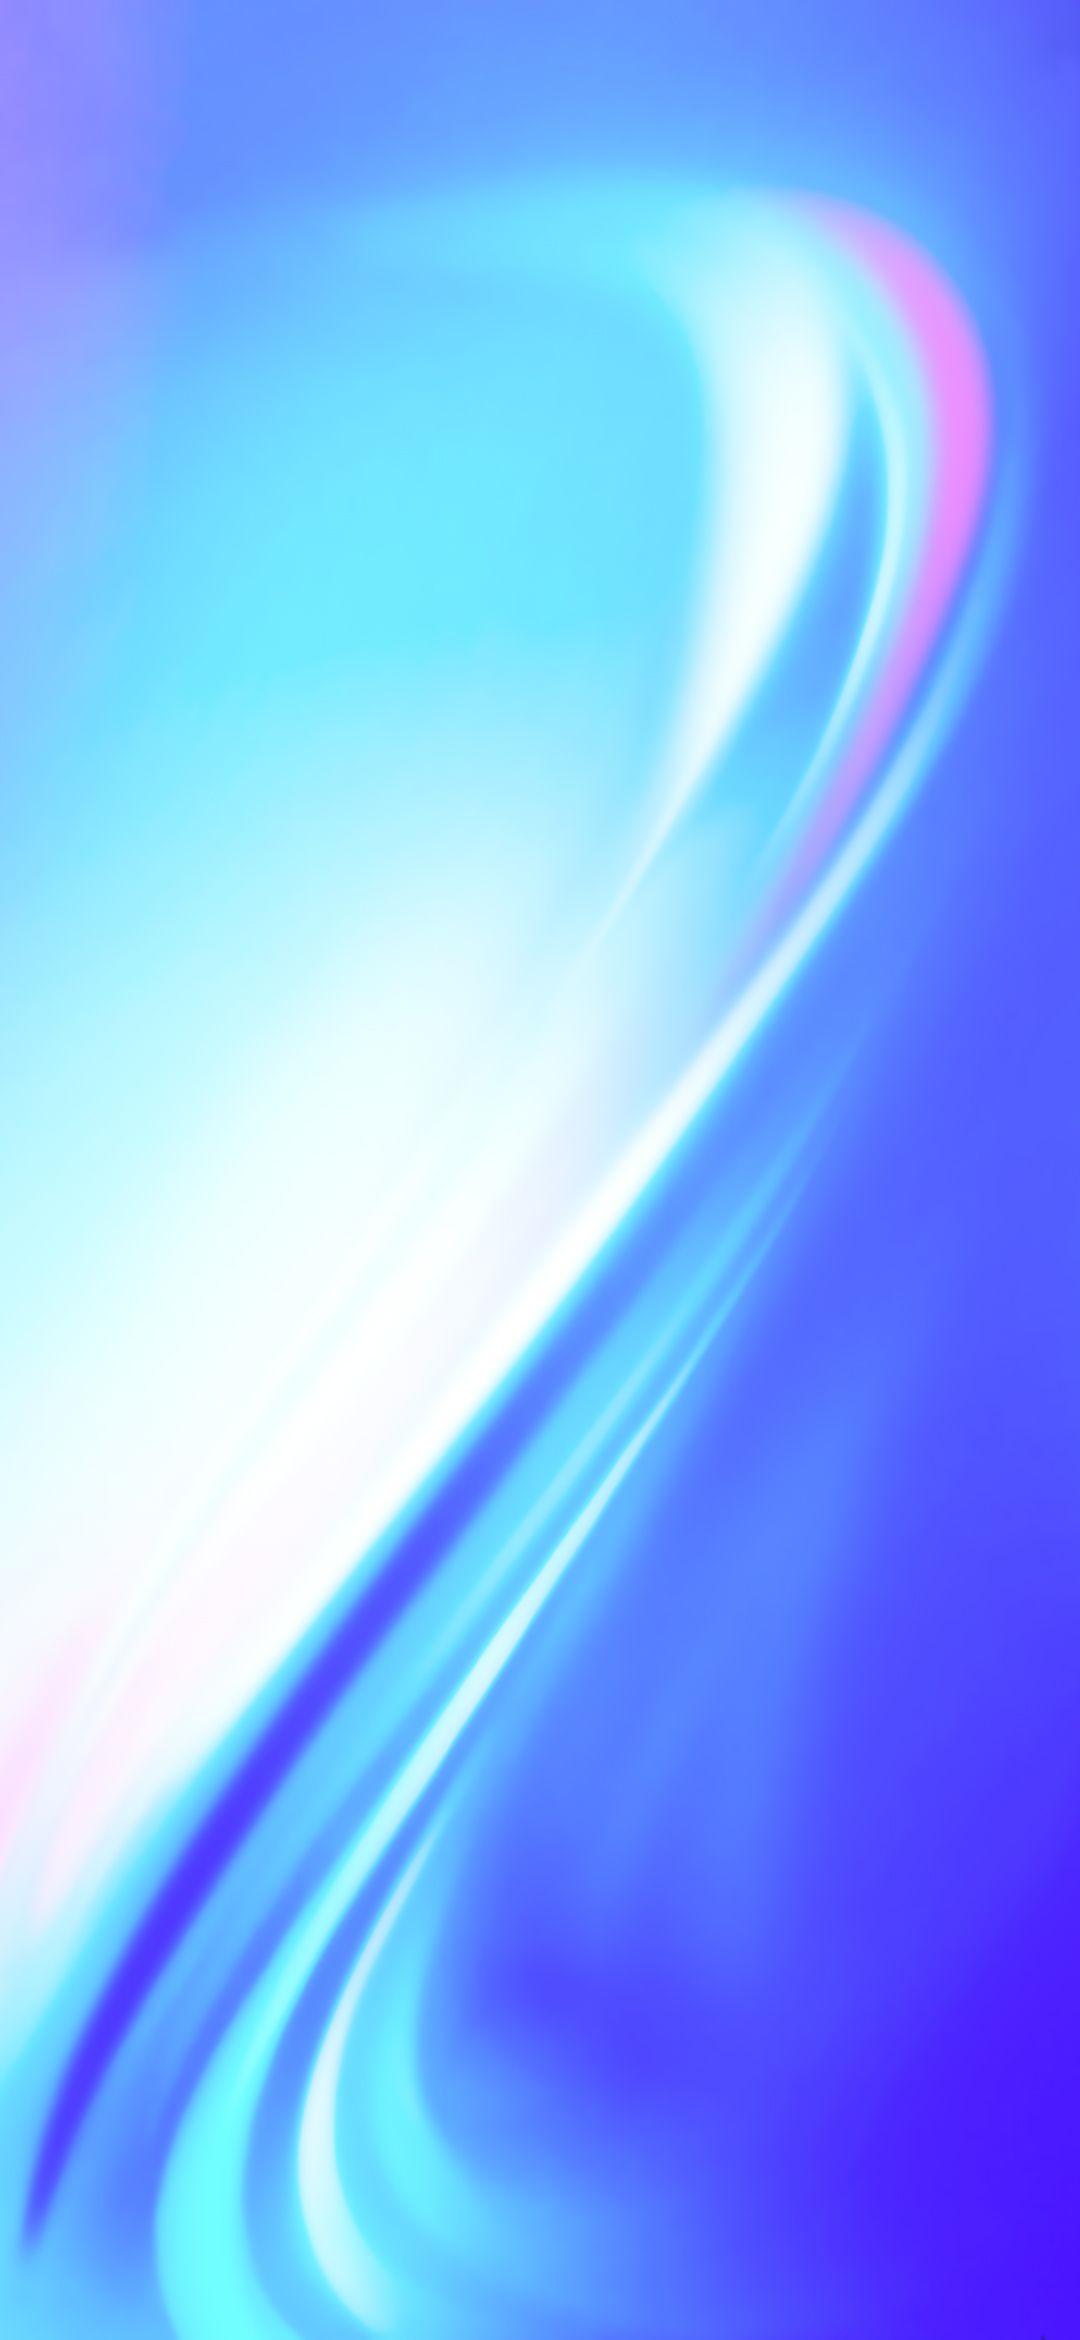 Theme Skin For Vivo S1 Pro  W  Apps on Google Play